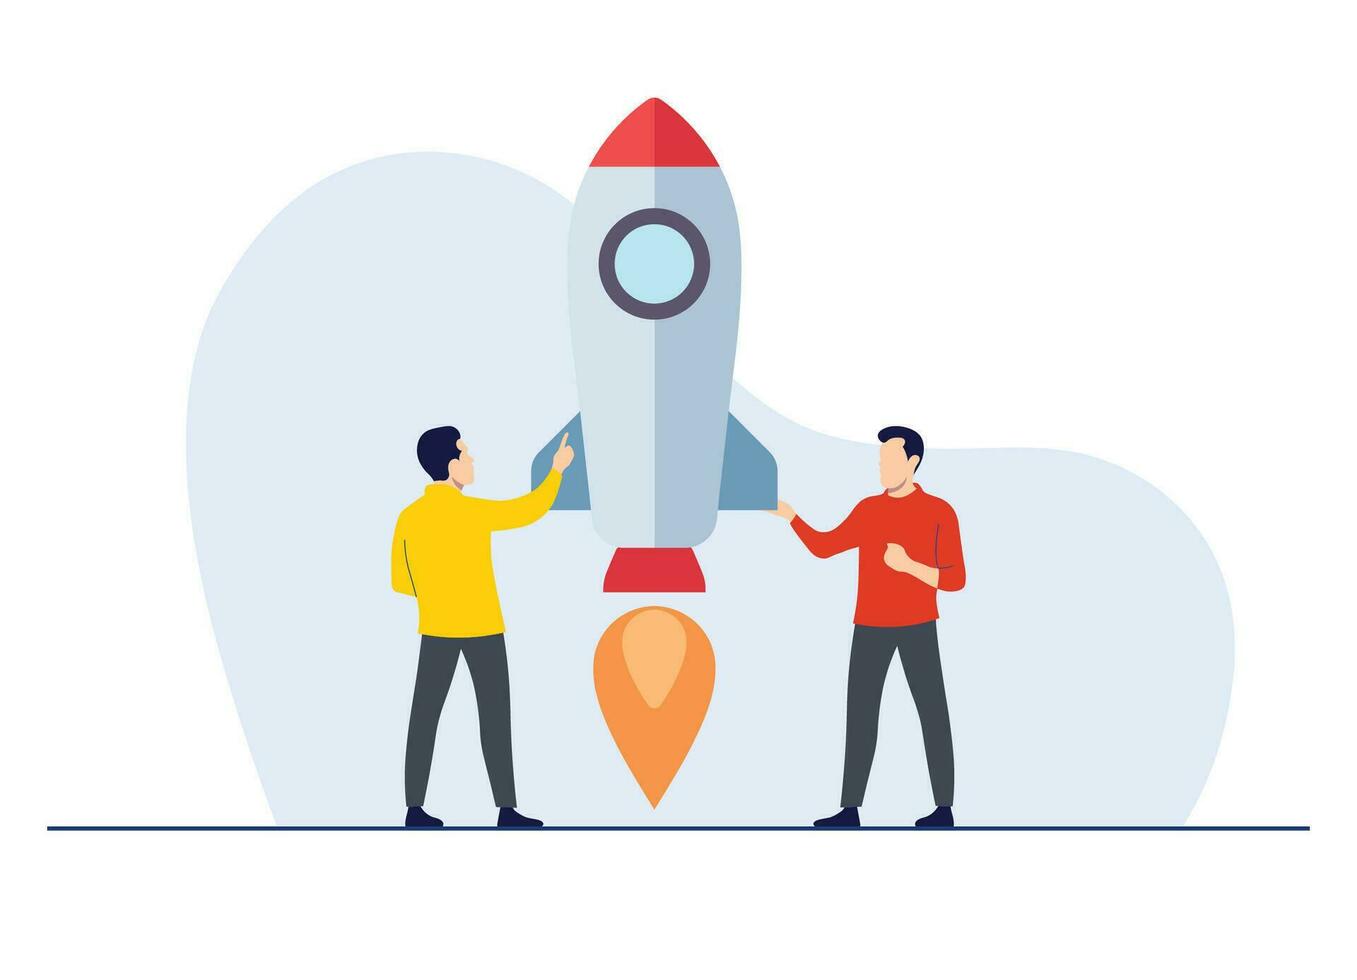 Startup rocket launch by business people or employees, Success of new project, entrepreneurship, New idea, Teamwork on new idea flat illustrations for web banner, landing page, infographic, mobile app vector